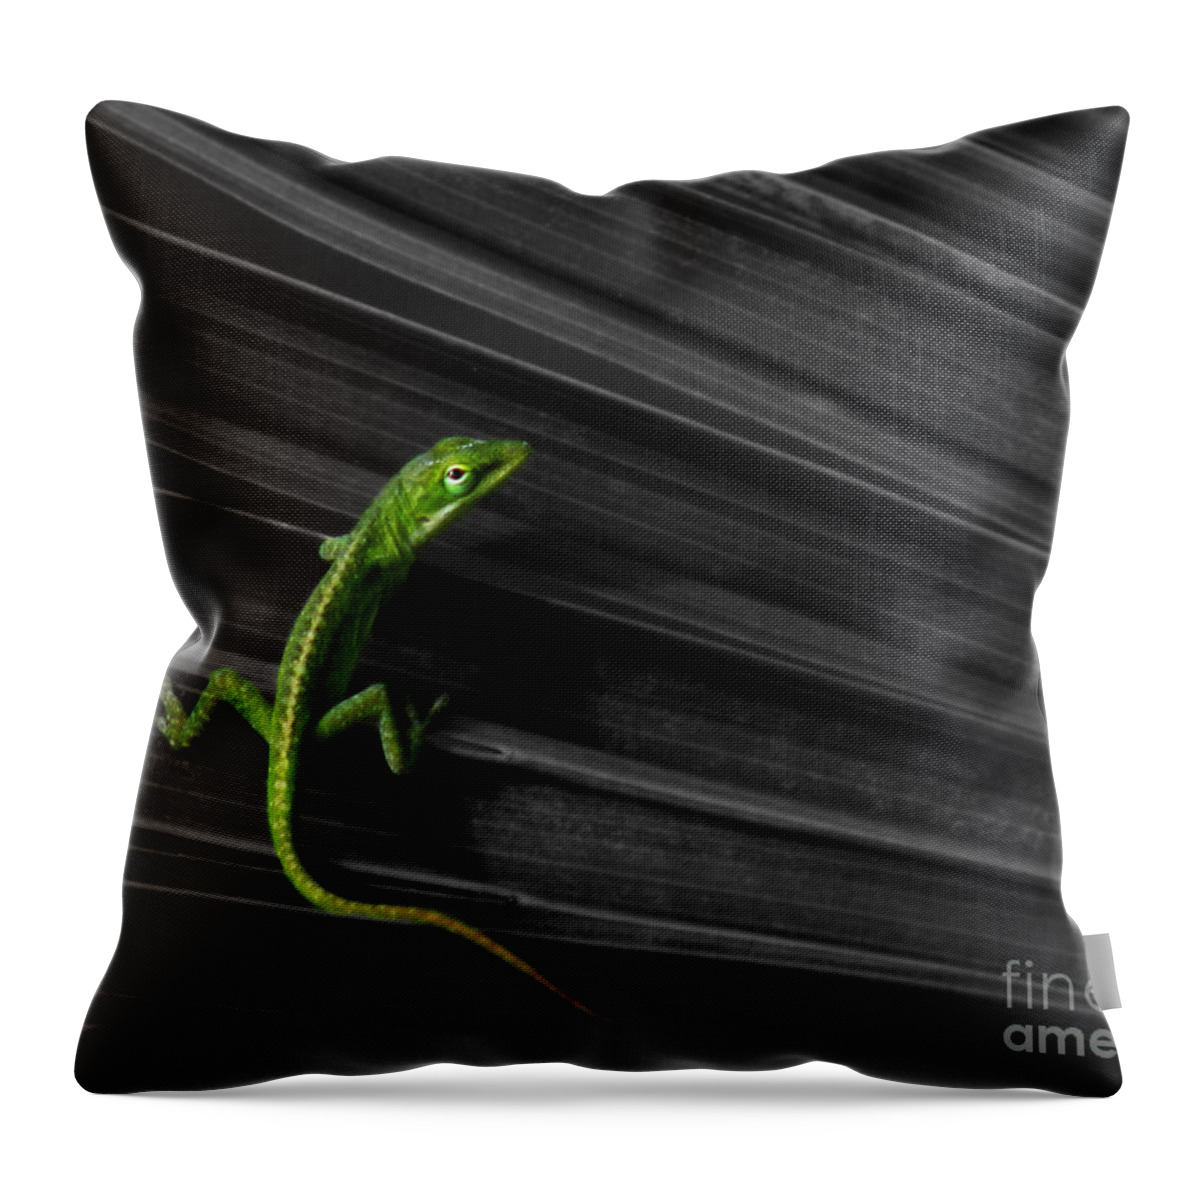 Anole Throw Pillow featuring the photograph Palm Leaf Lizard by Deborah Smith